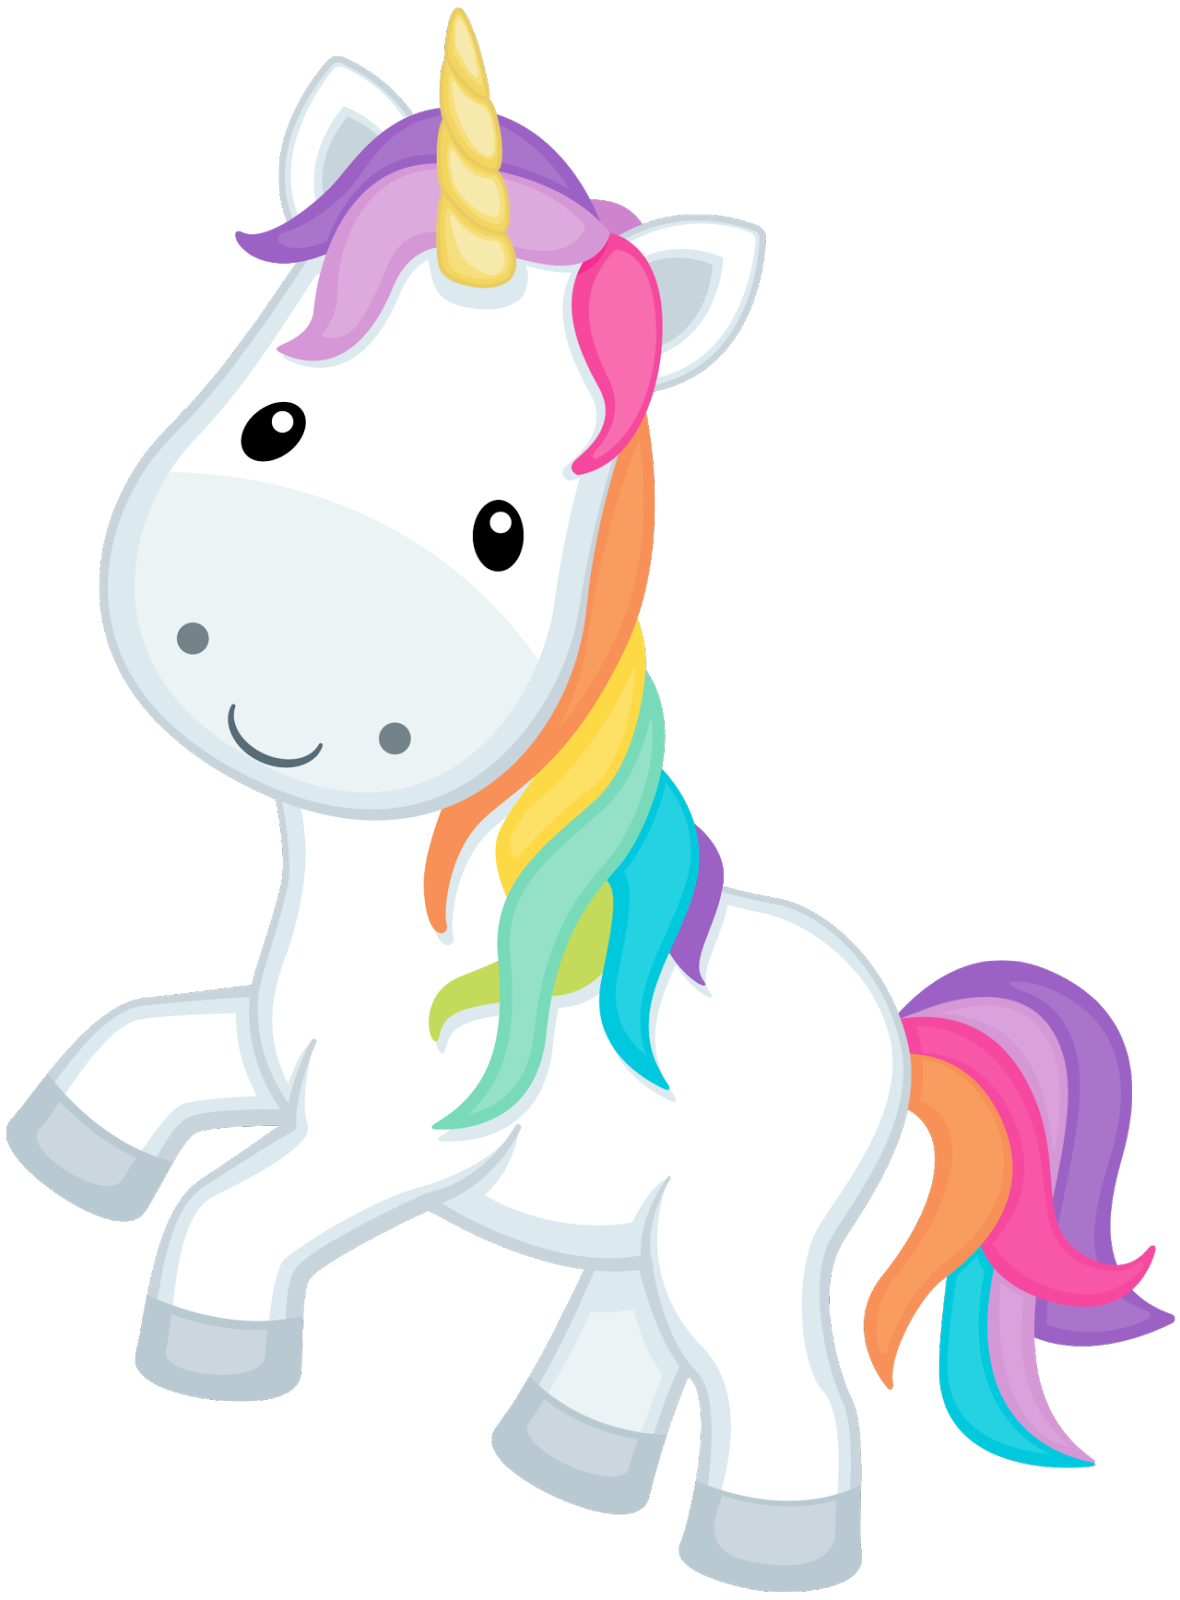 Download Clipart baby unicorn, Clipart baby unicorn Transparent FREE for download on WebStockReview 2020